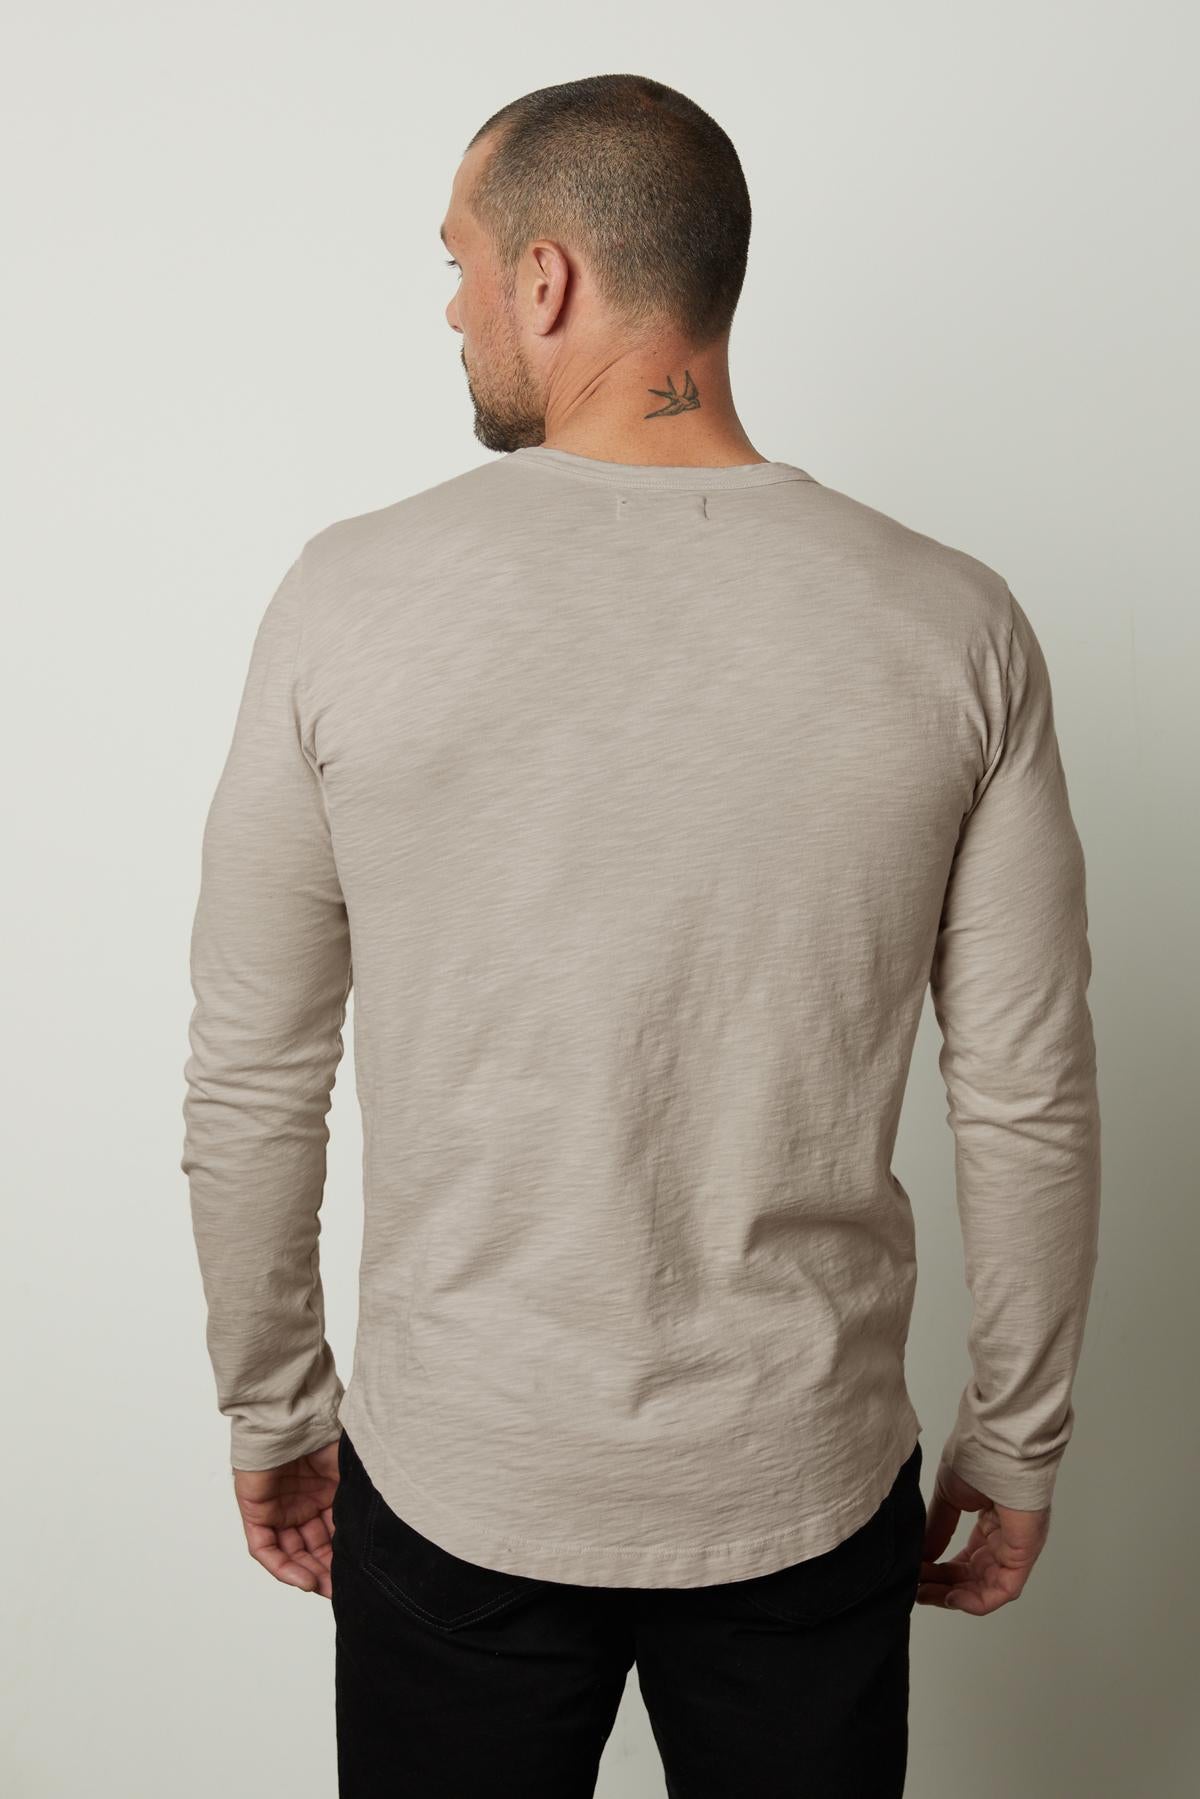 The back view of a man wearing a Velvet by Graham & Spencer KAI CREW NECK TEE, perfect for layering.-35776214663361